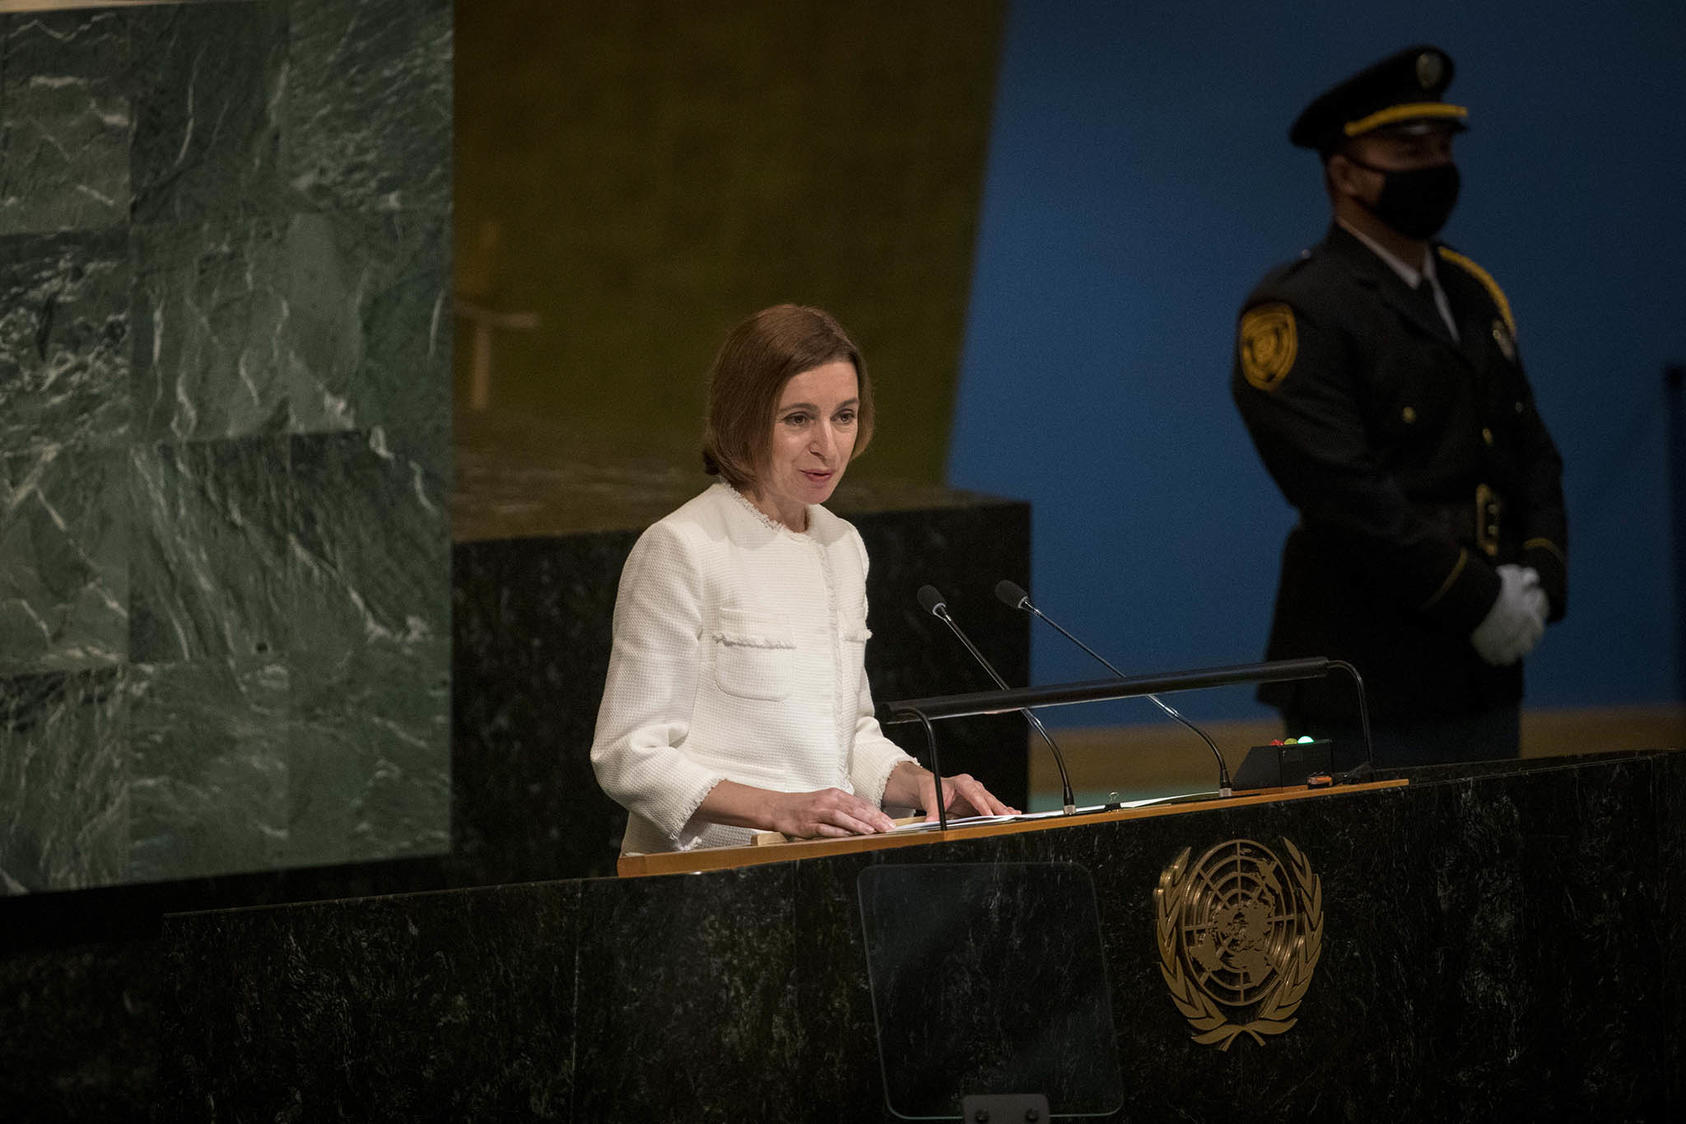 Moldovan President Maia Sandu speaks at the United Nations in 2022. Moldova faces Russian hybrid attacks on its effort under Sandu to join the European Union. That conflict will sharpen as she seeks reelection in 2024. (Dave Sanders/The New York Times)